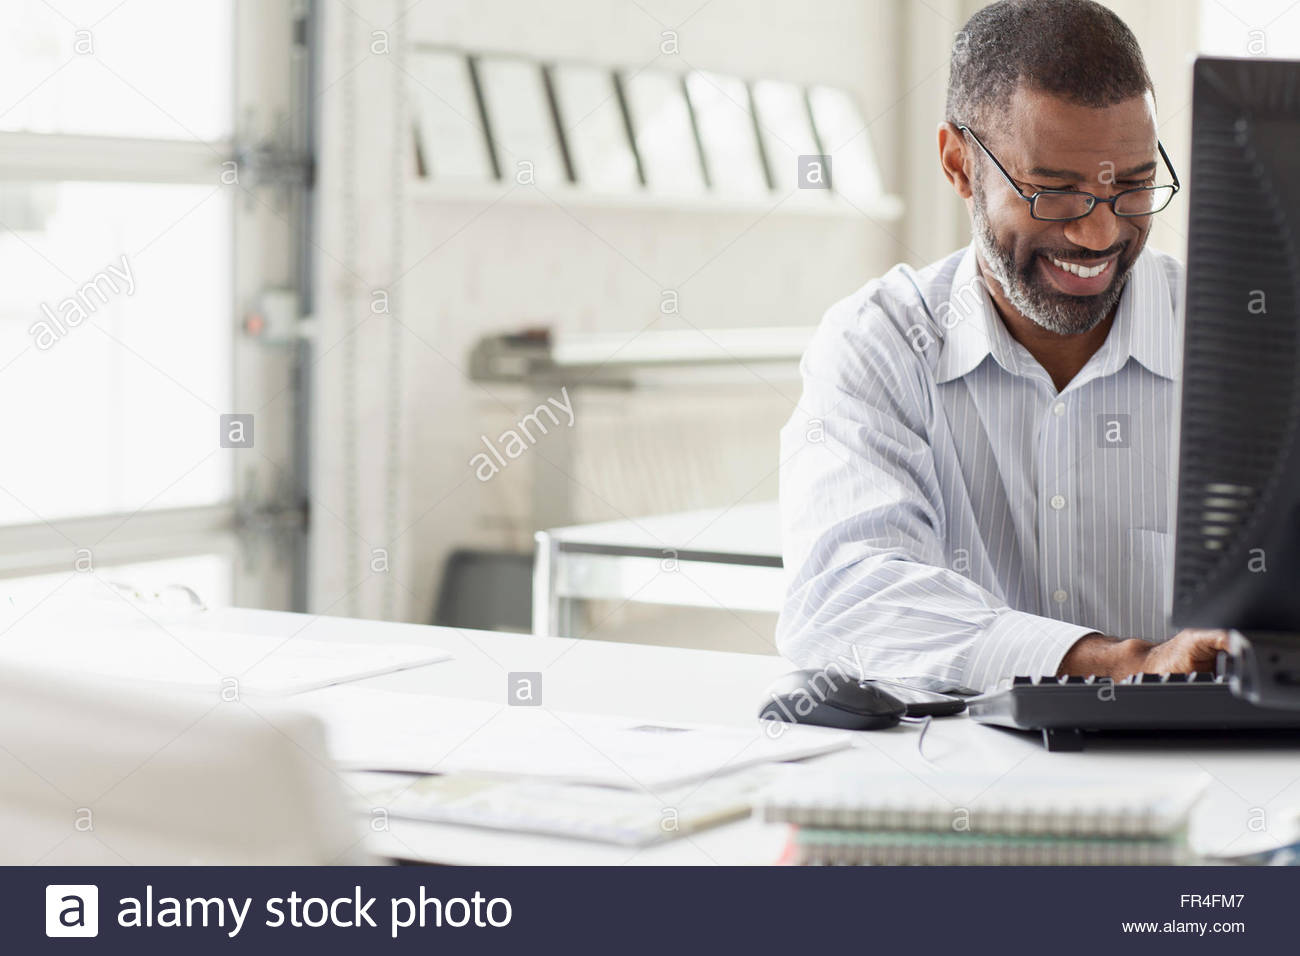 attractive businessman smiling as he keyboards Stock Photo